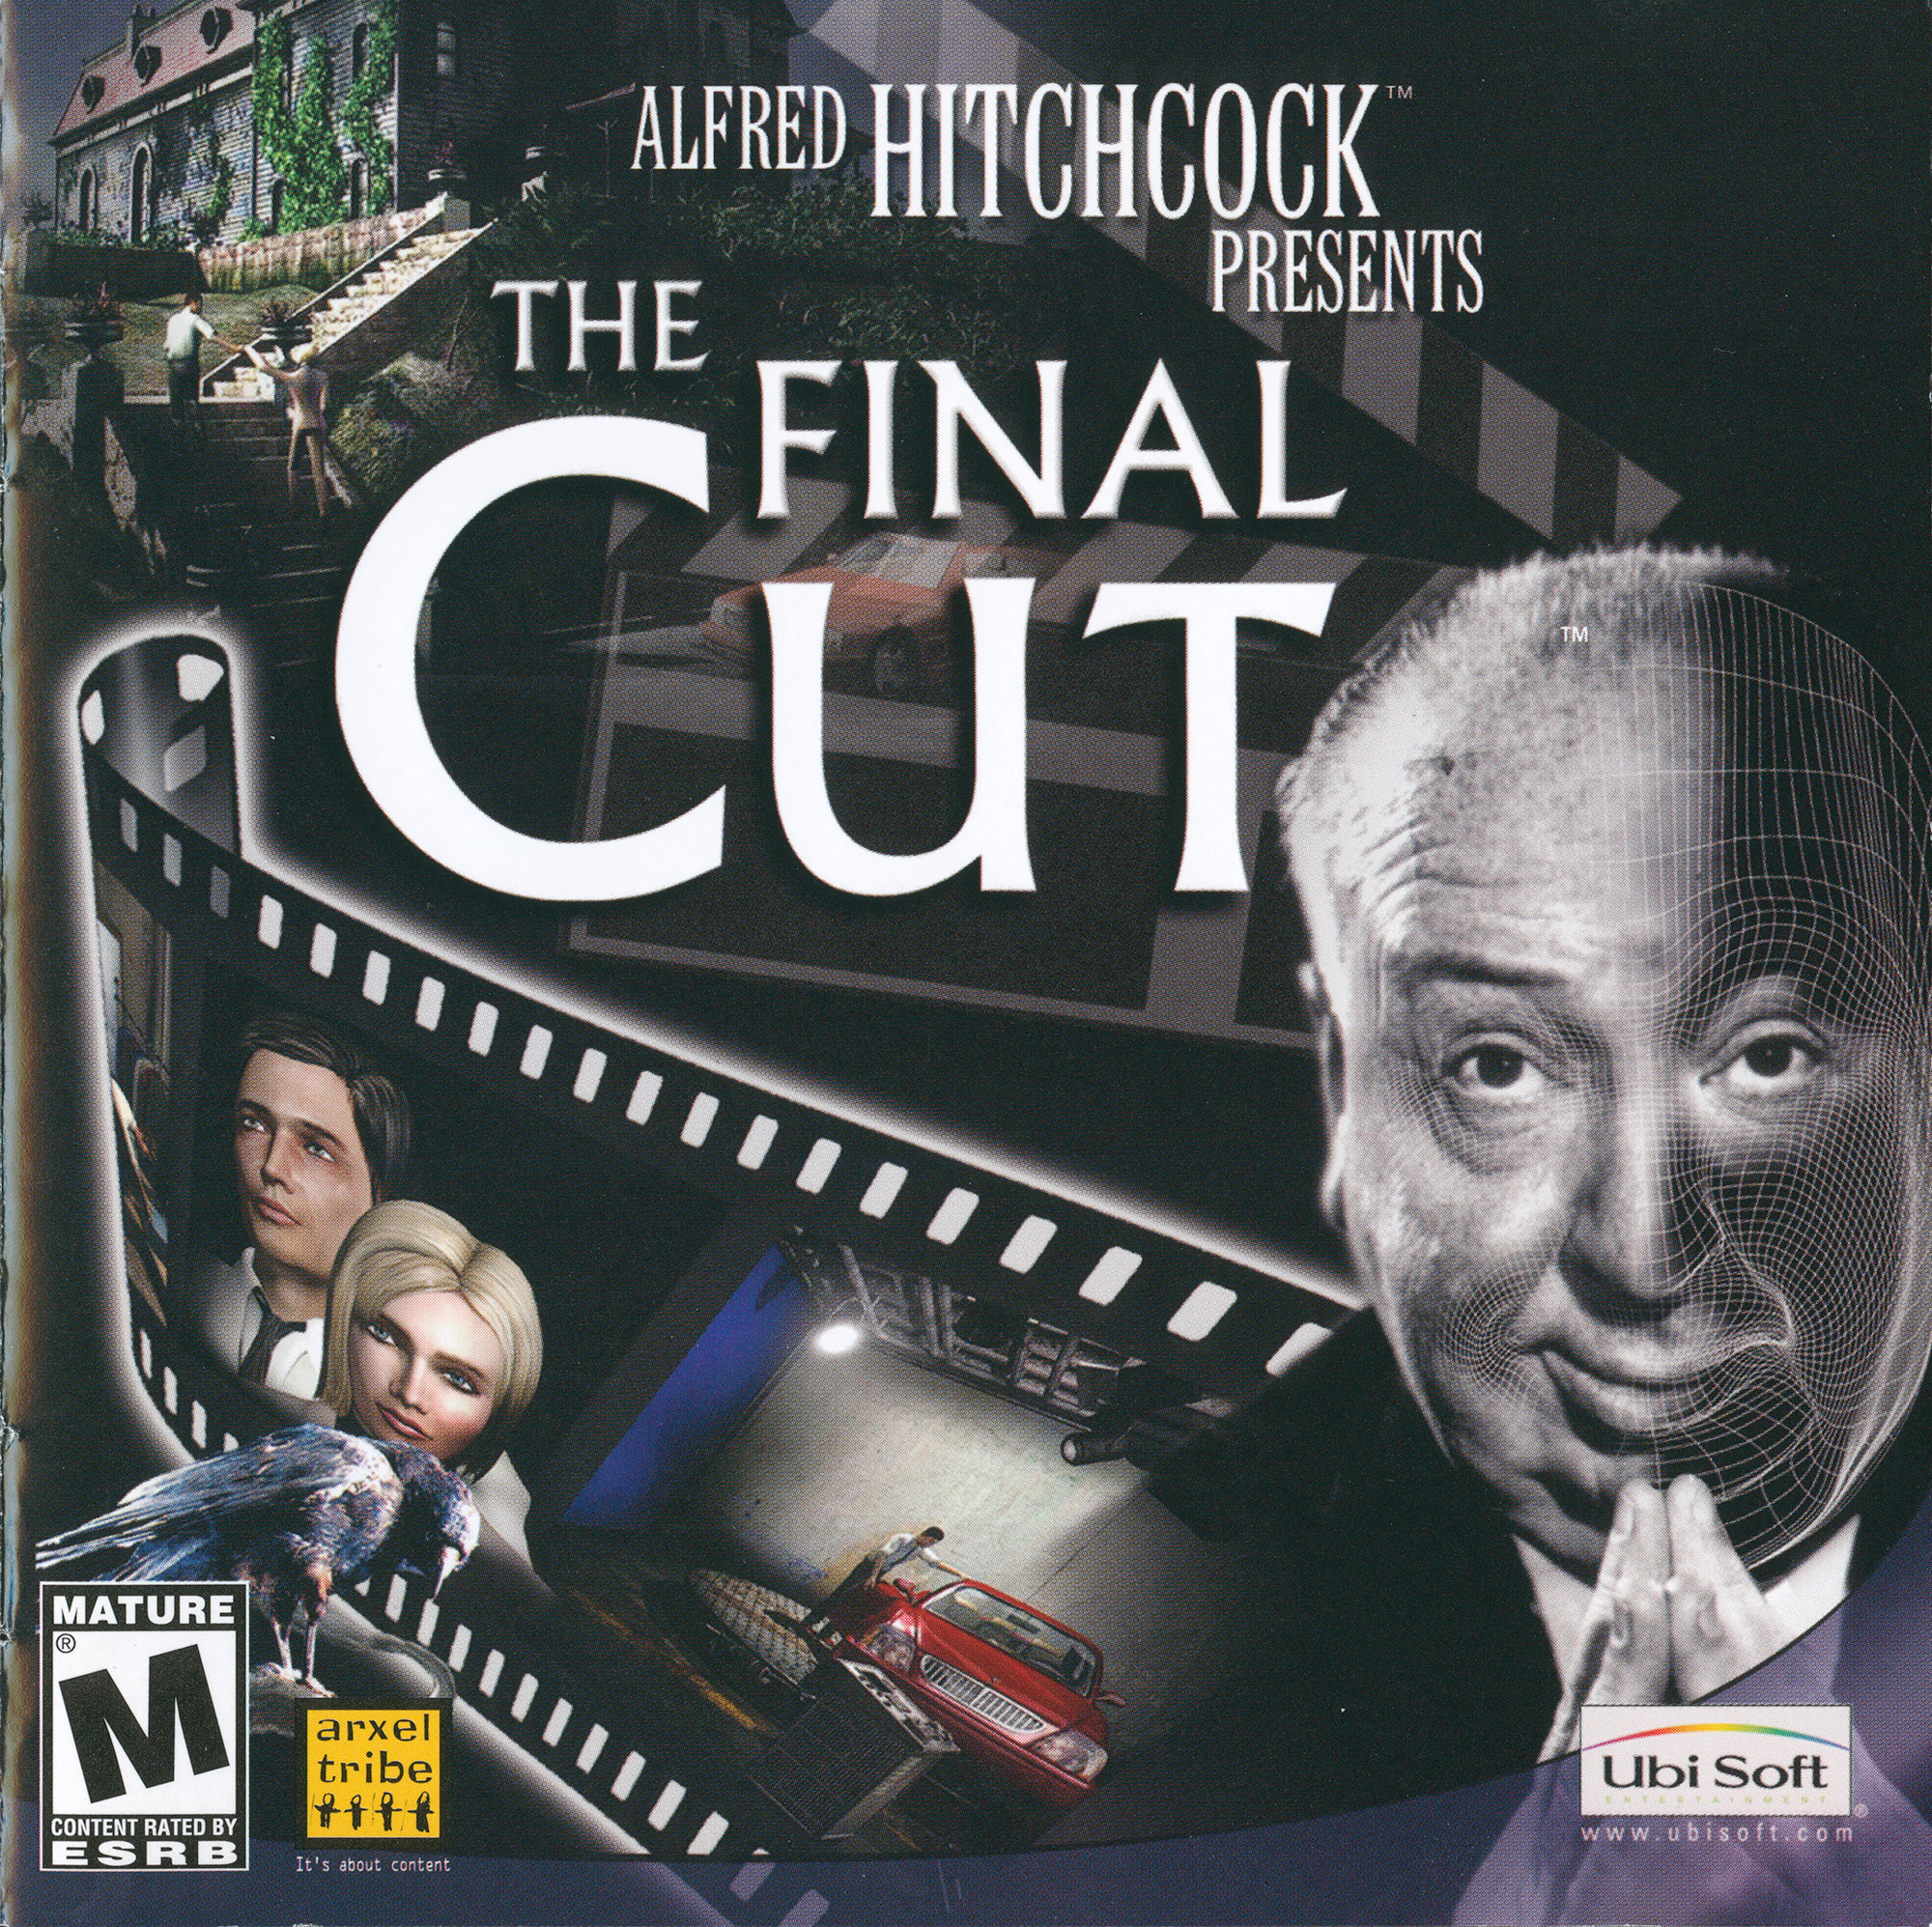 Alfred Hitchcock Presents: The Final Cut (USA) : Arxel Tribe